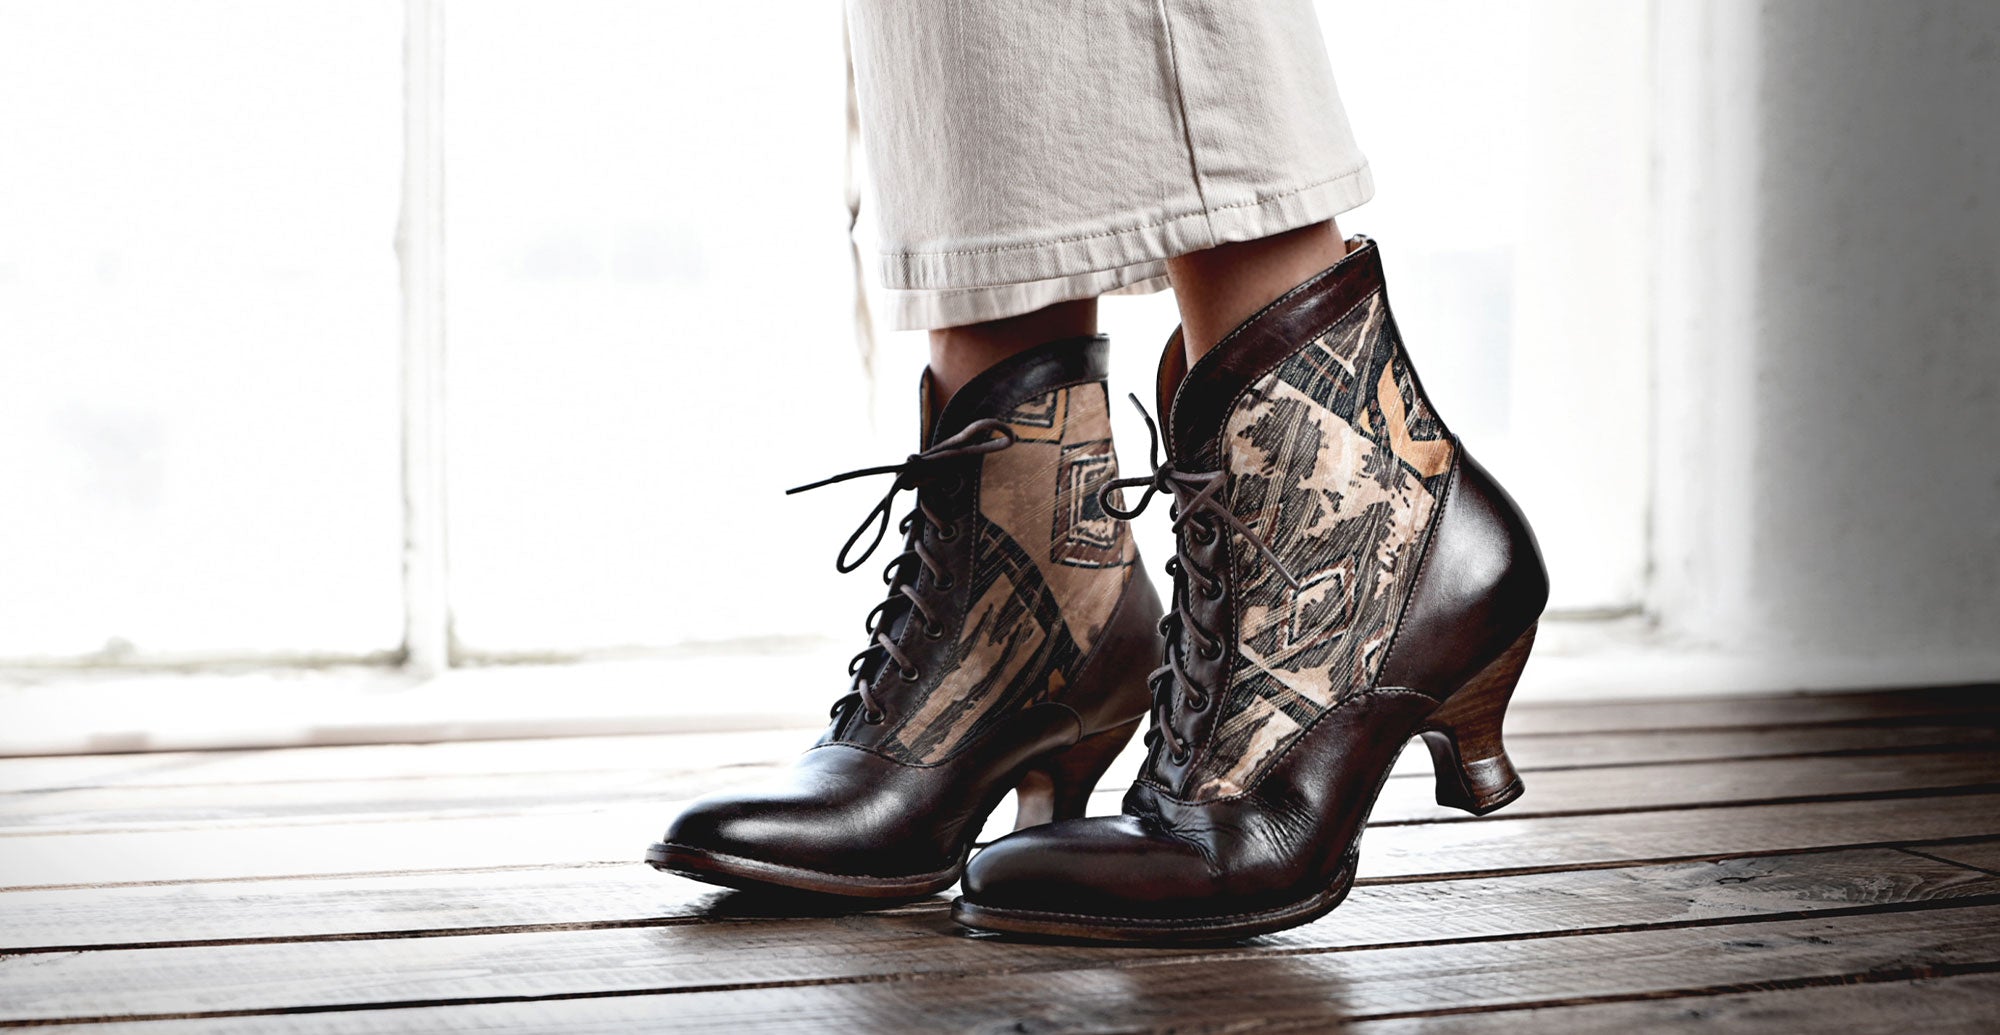 A woman wearing a pair of boots with tattoos on them.